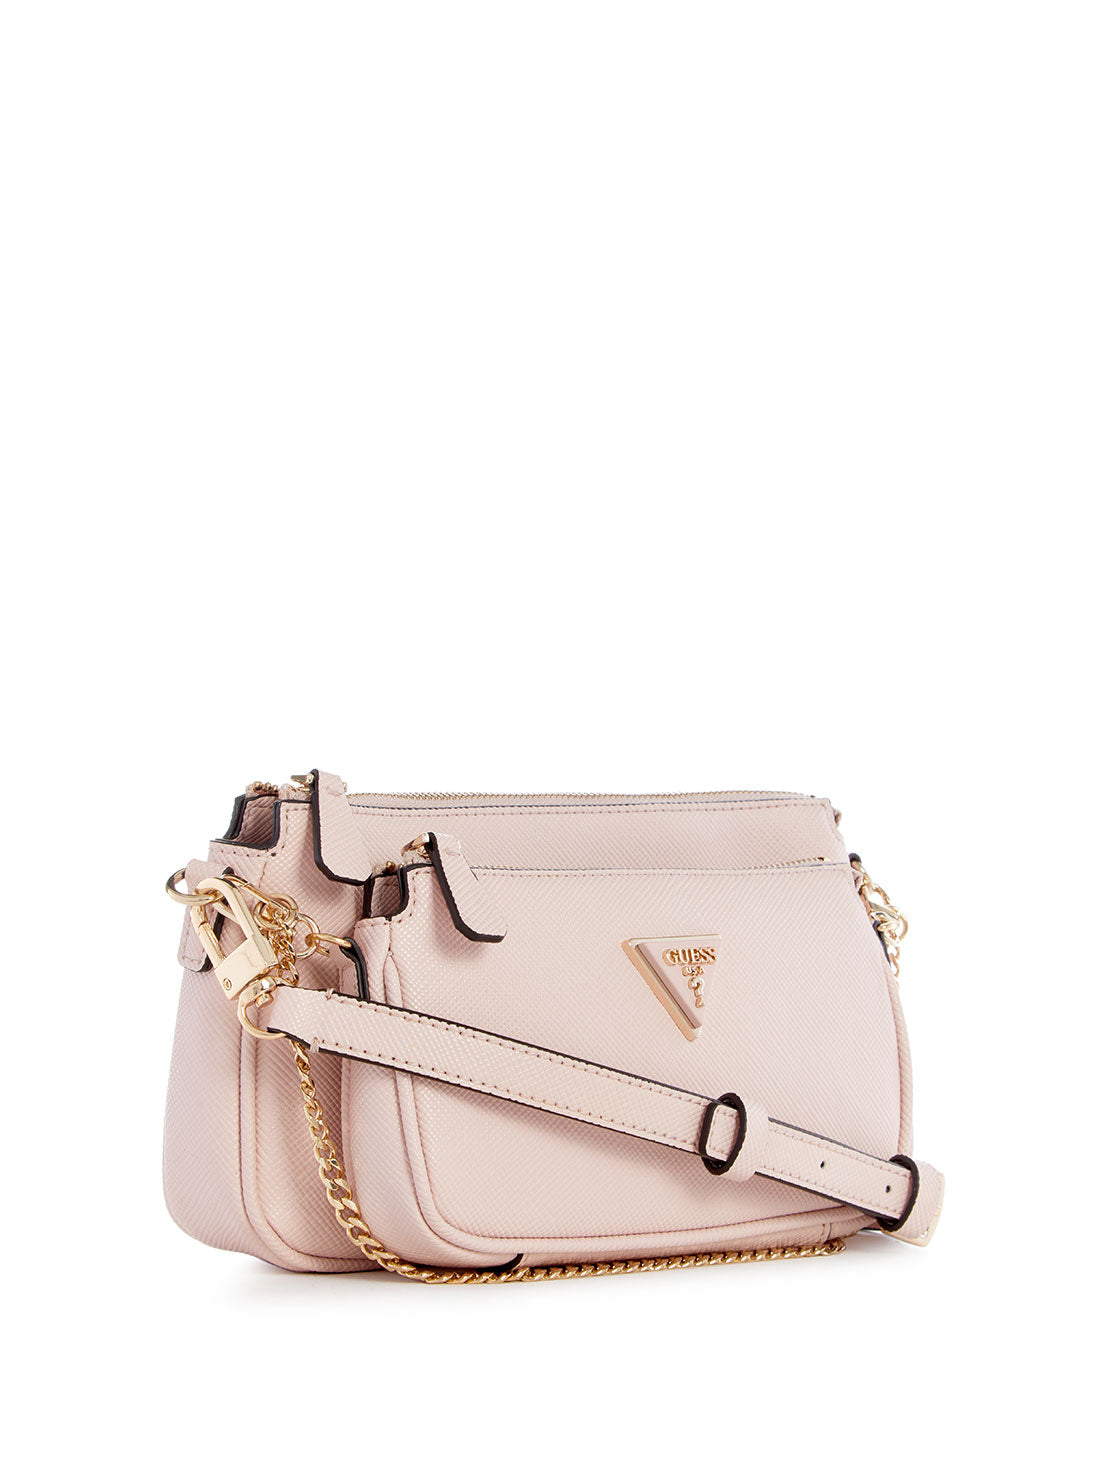 GUESS Pink Noelle Pouch Crossbody Bag side view